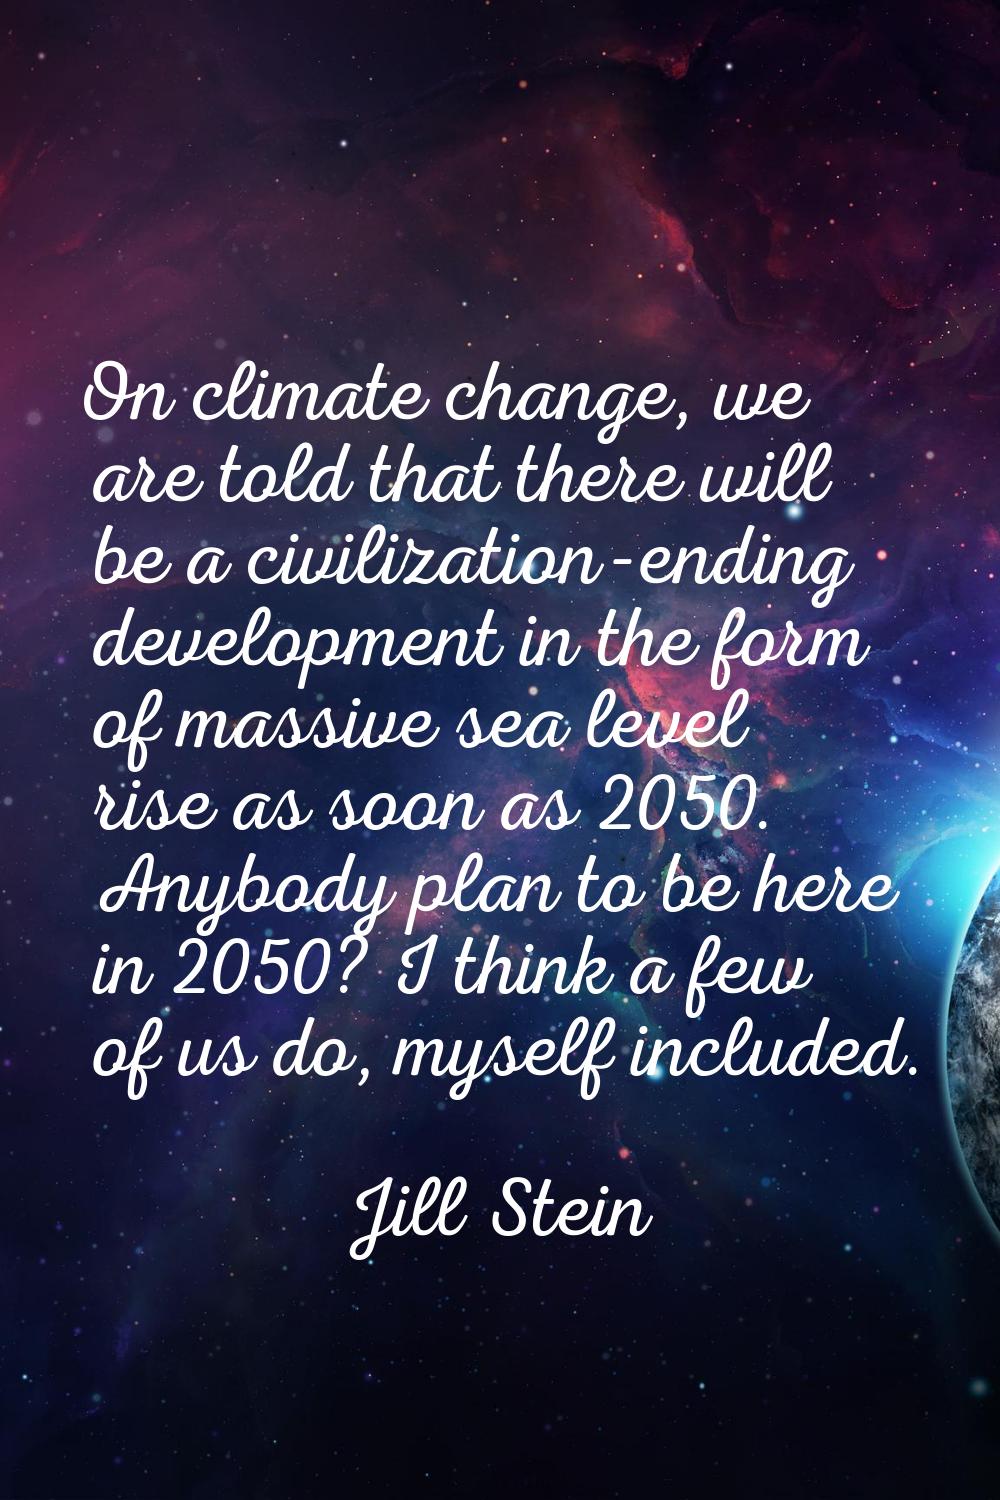 On climate change, we are told that there will be a civilization-ending development in the form of 